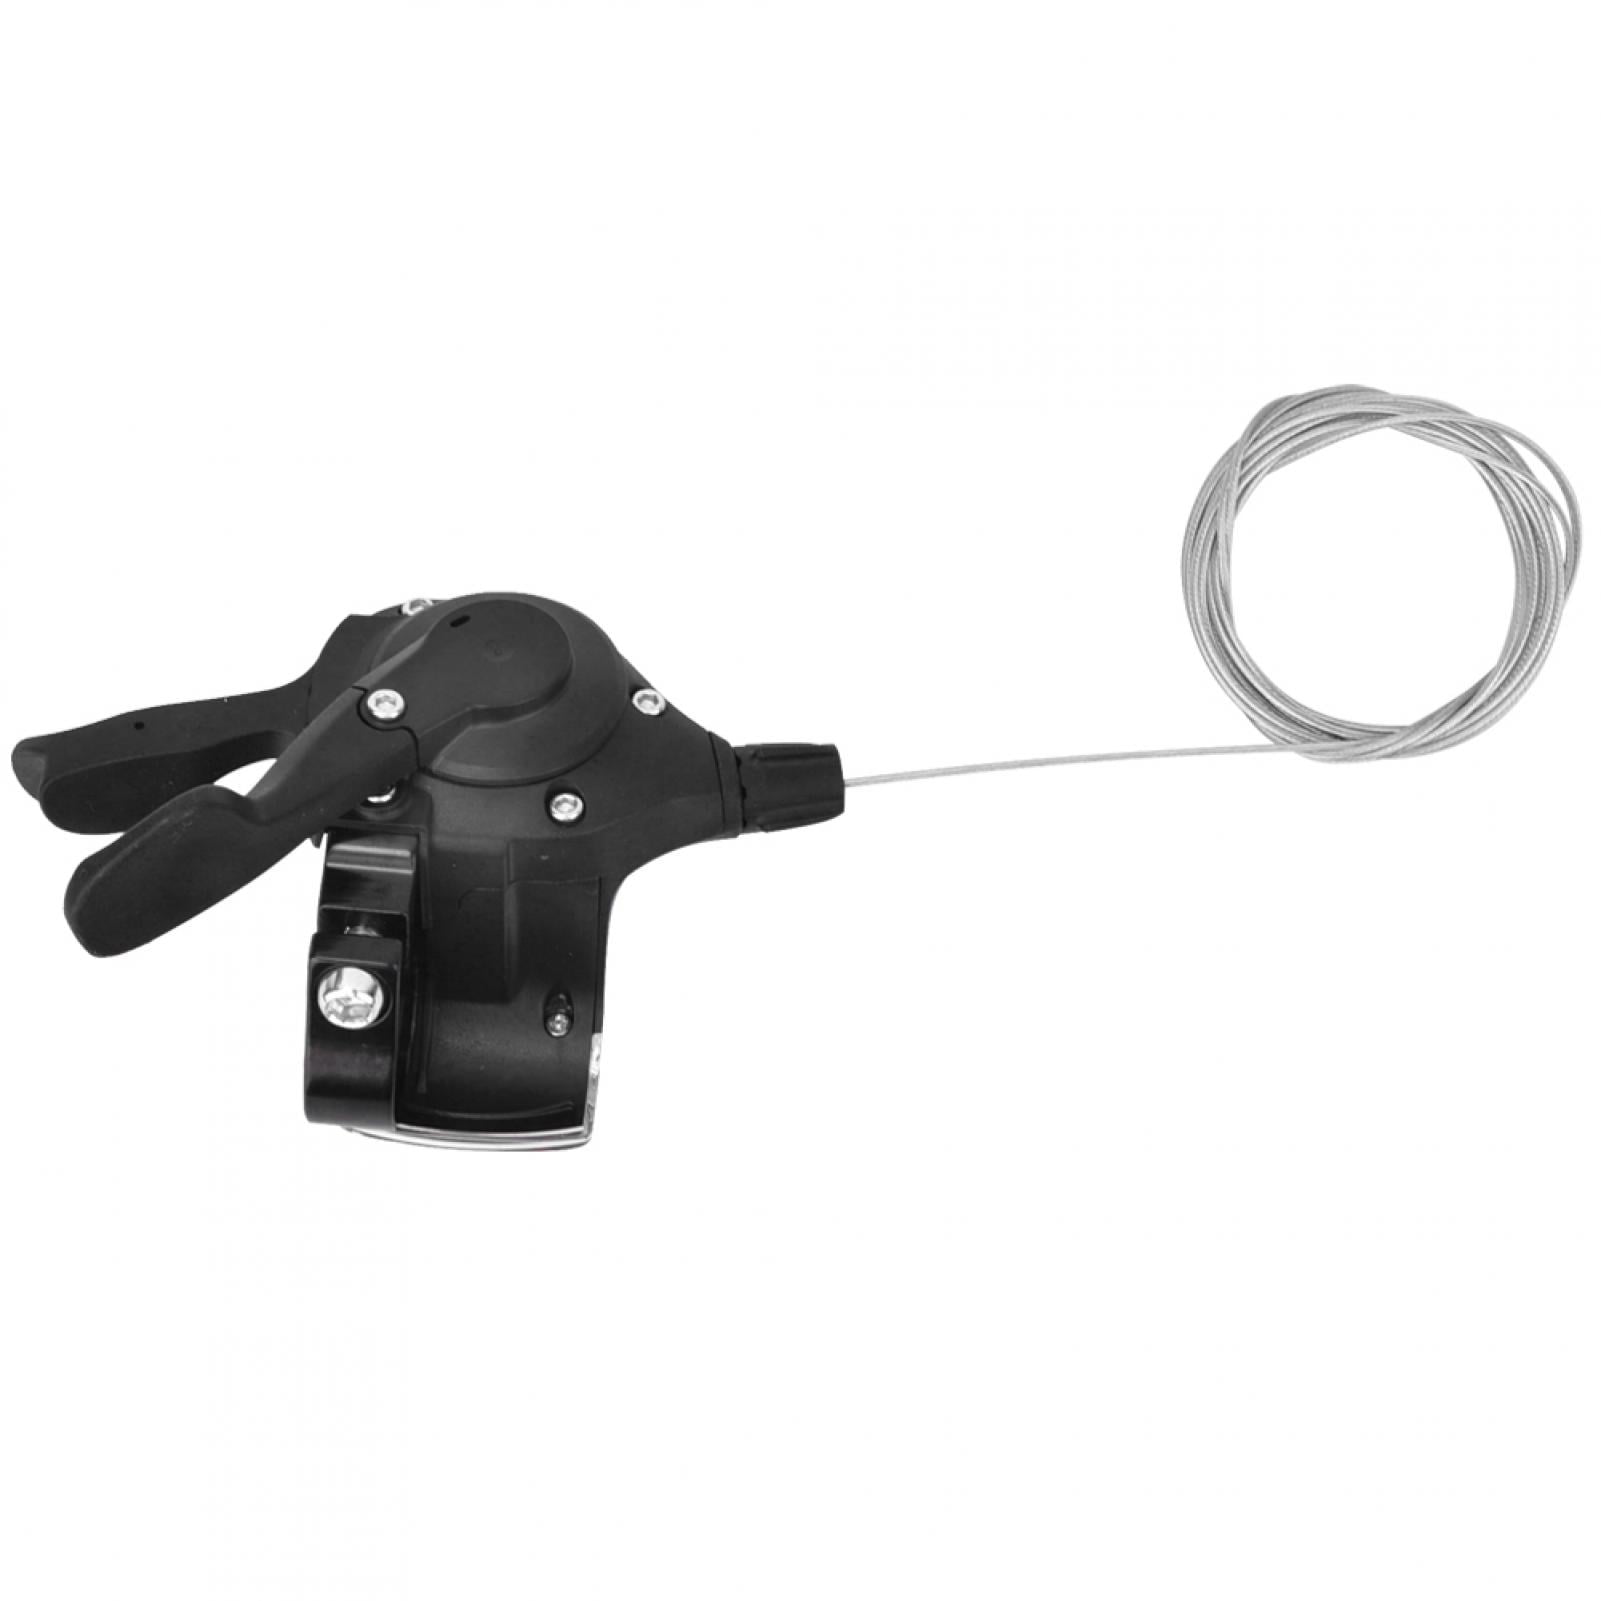 Bicycle Trigger Shifter SL-M400 Black ABS Plastic 11 Speed Mountain Bike Trigger Gear Shifter Outdoor Bicycle Cycling